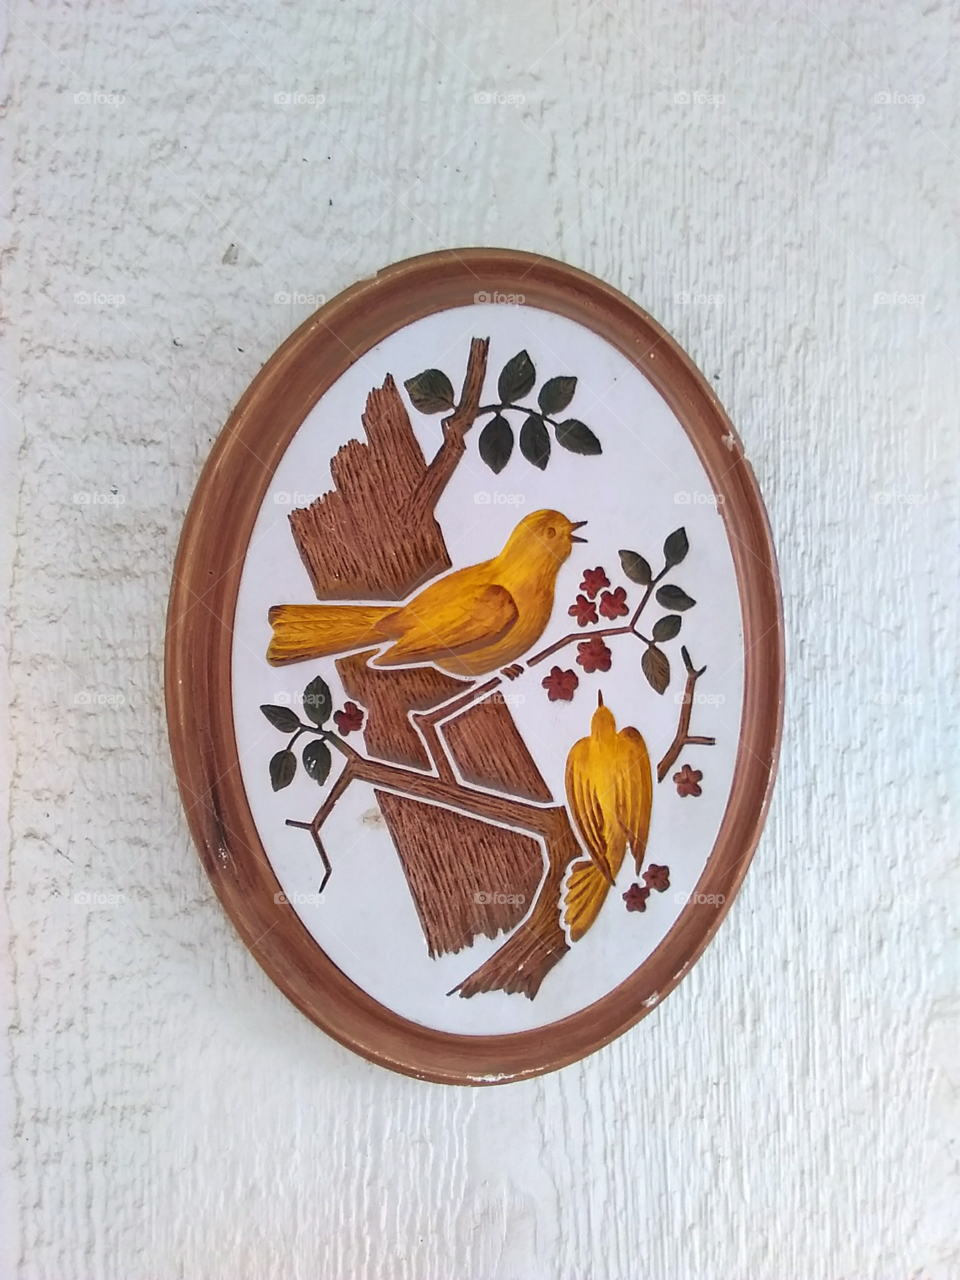 Painted plaster relief